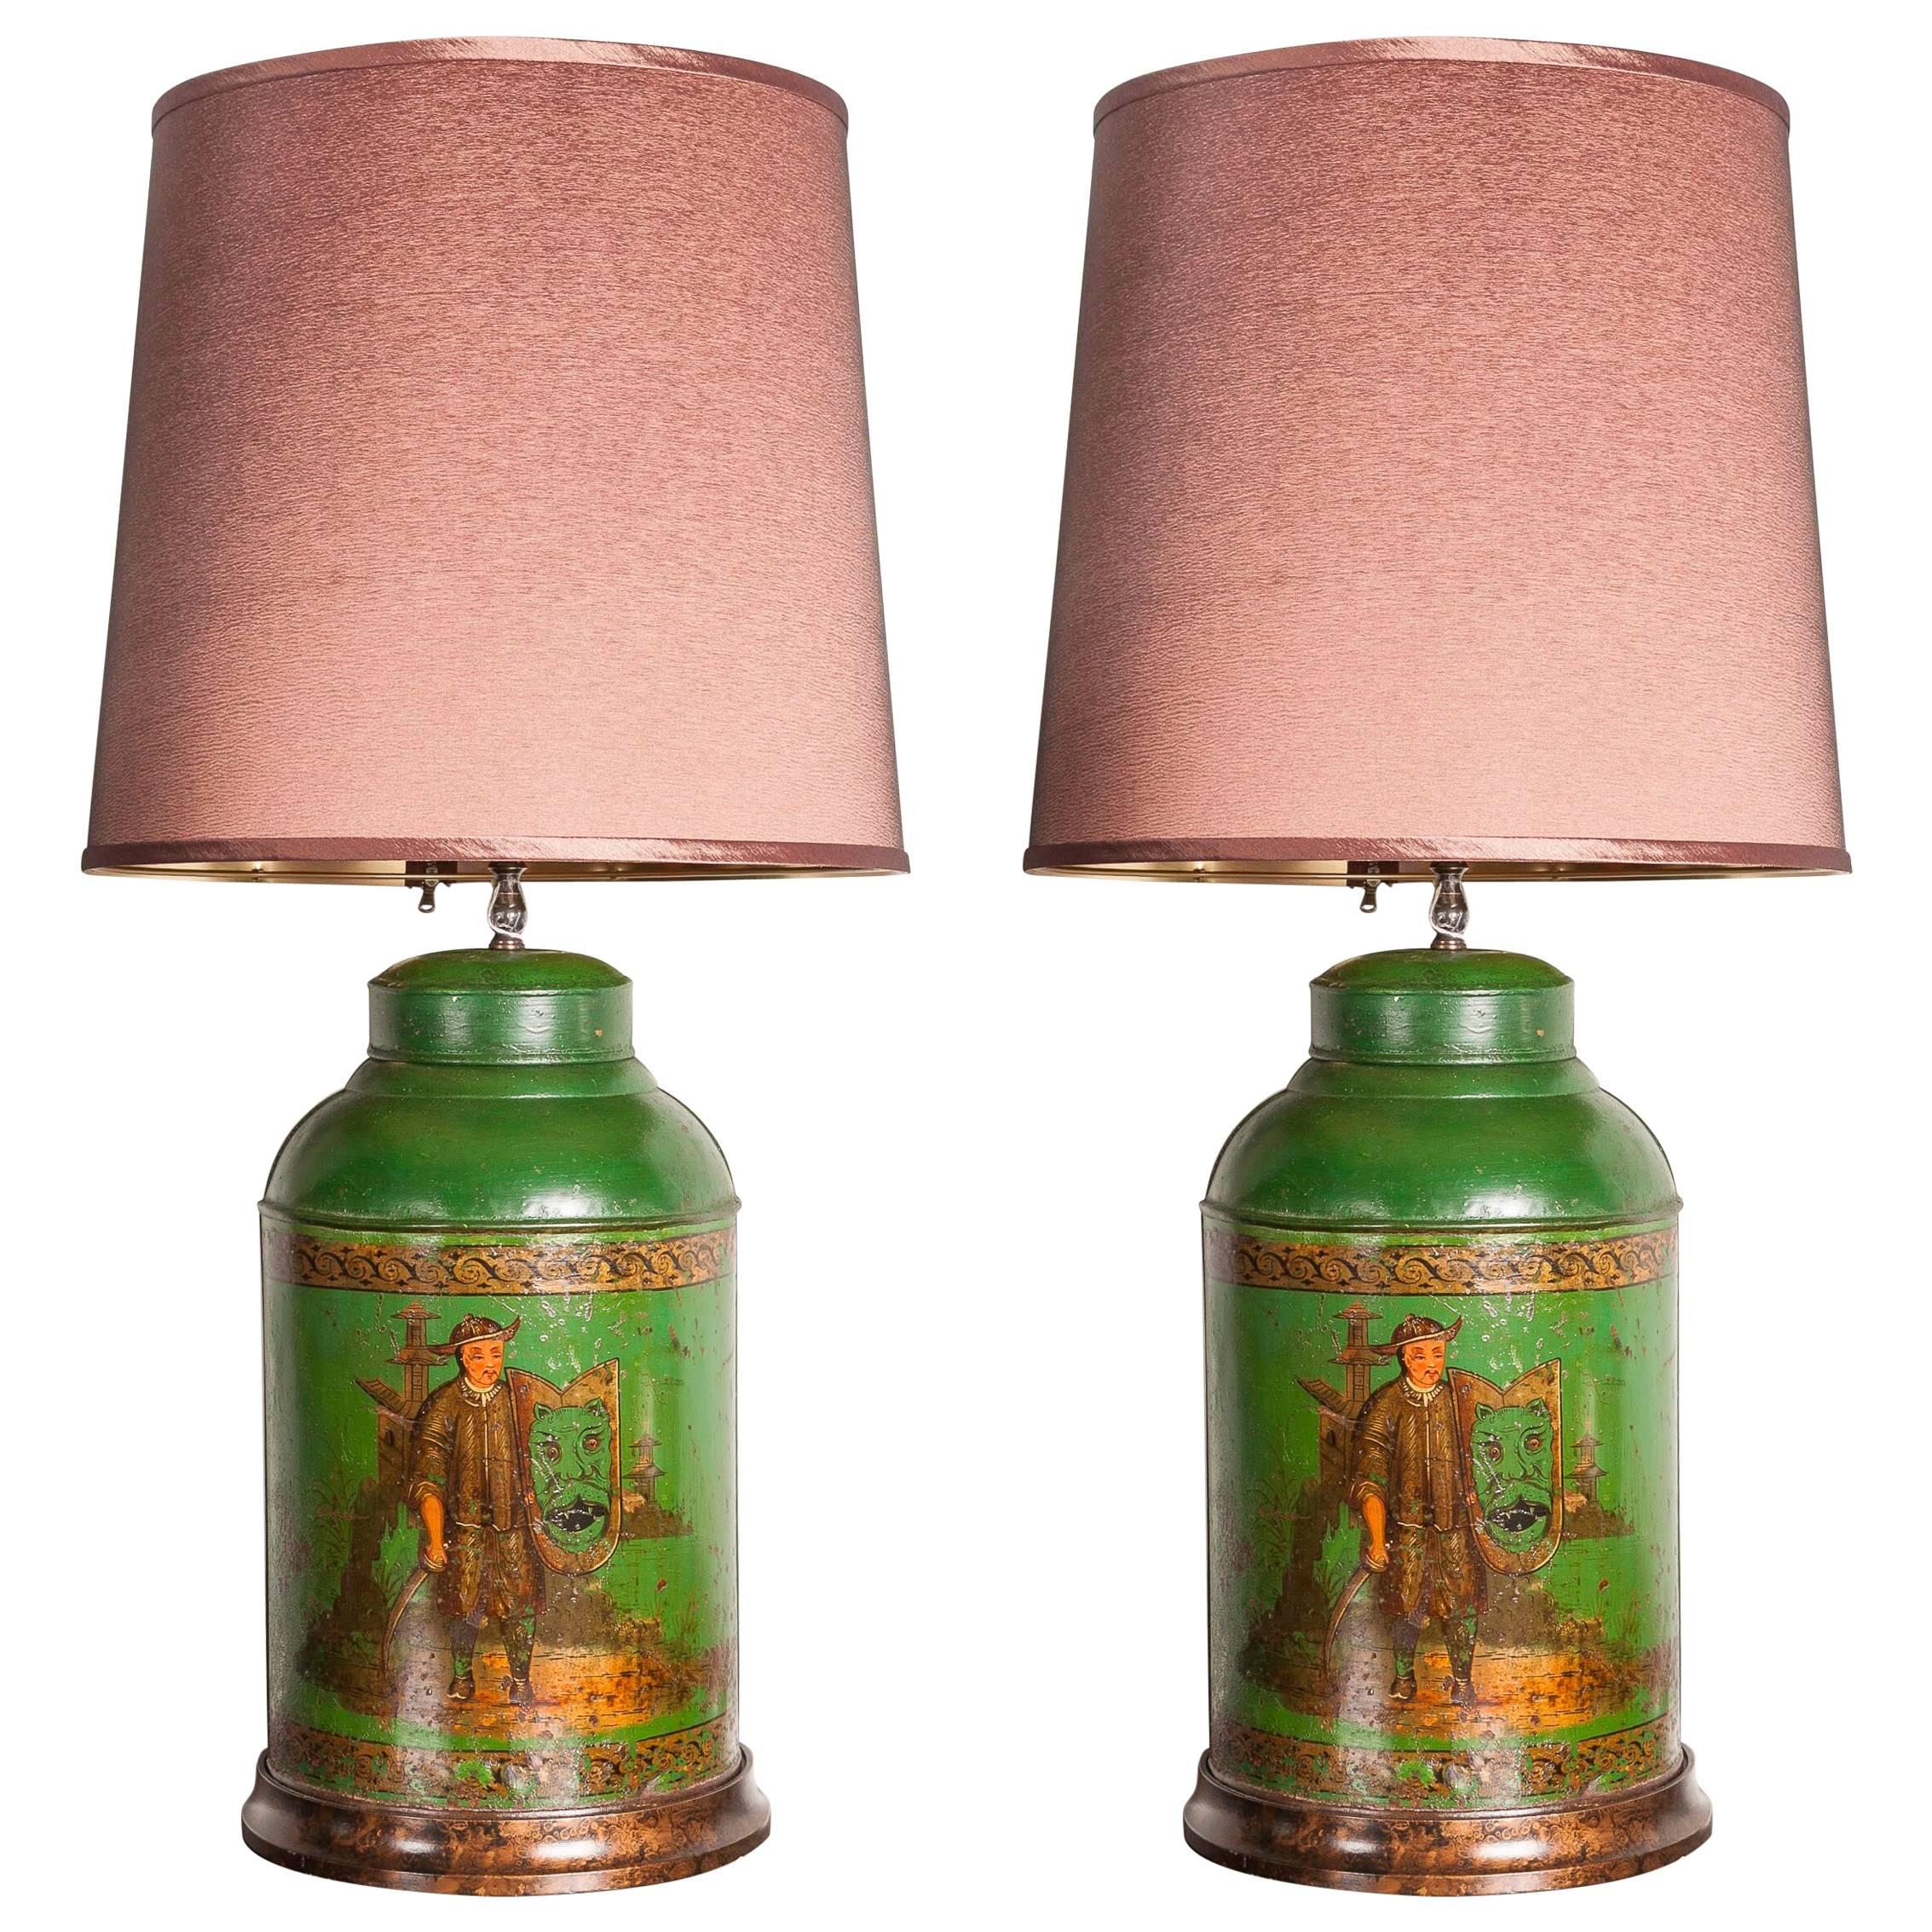 Rare Pair of 19th Century English Painted Tea Caddy Lamps For Sale